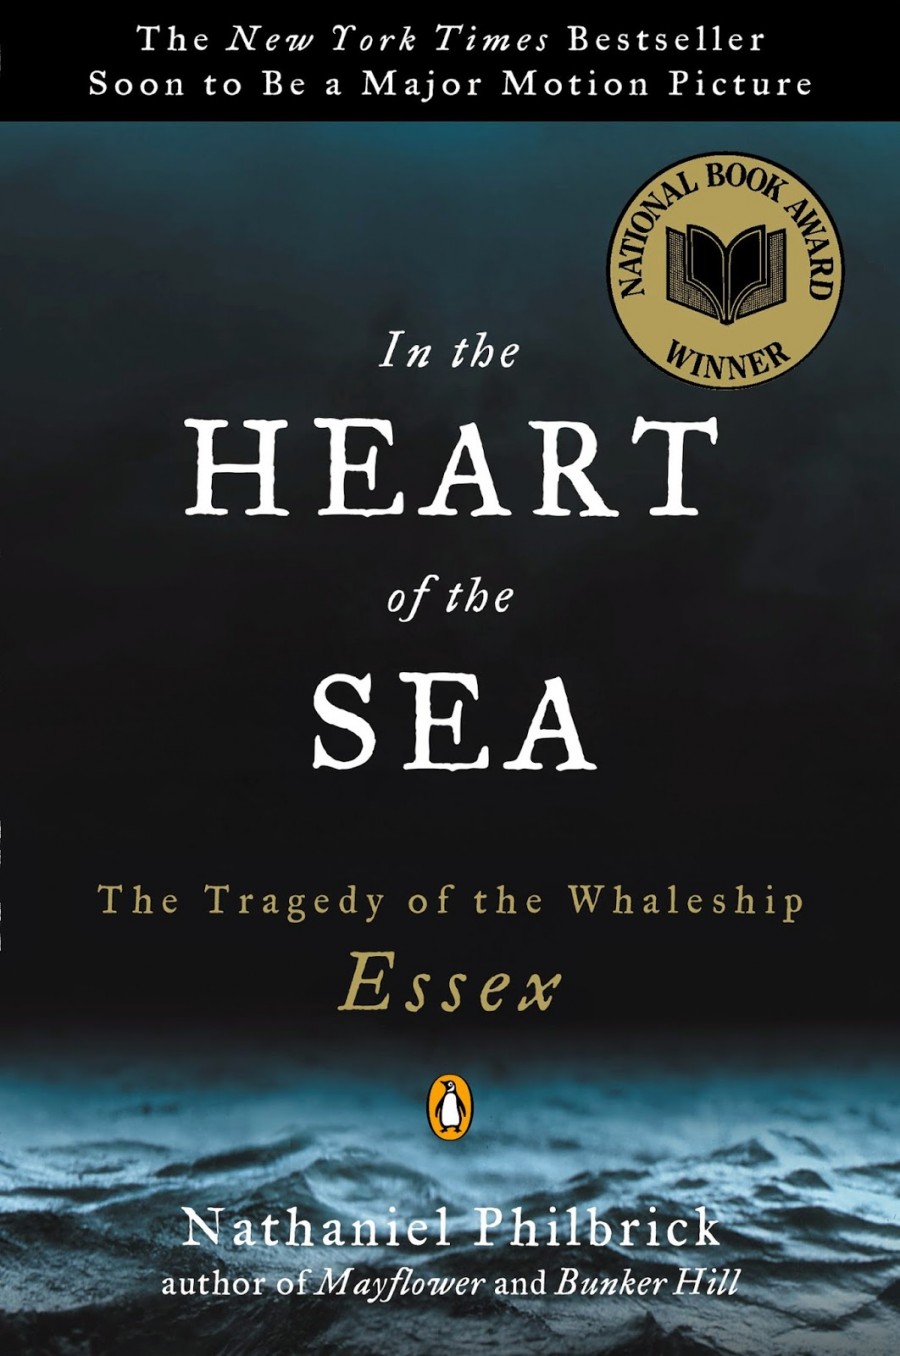 Adaptive reasoning: ‘in the heart of the sea’